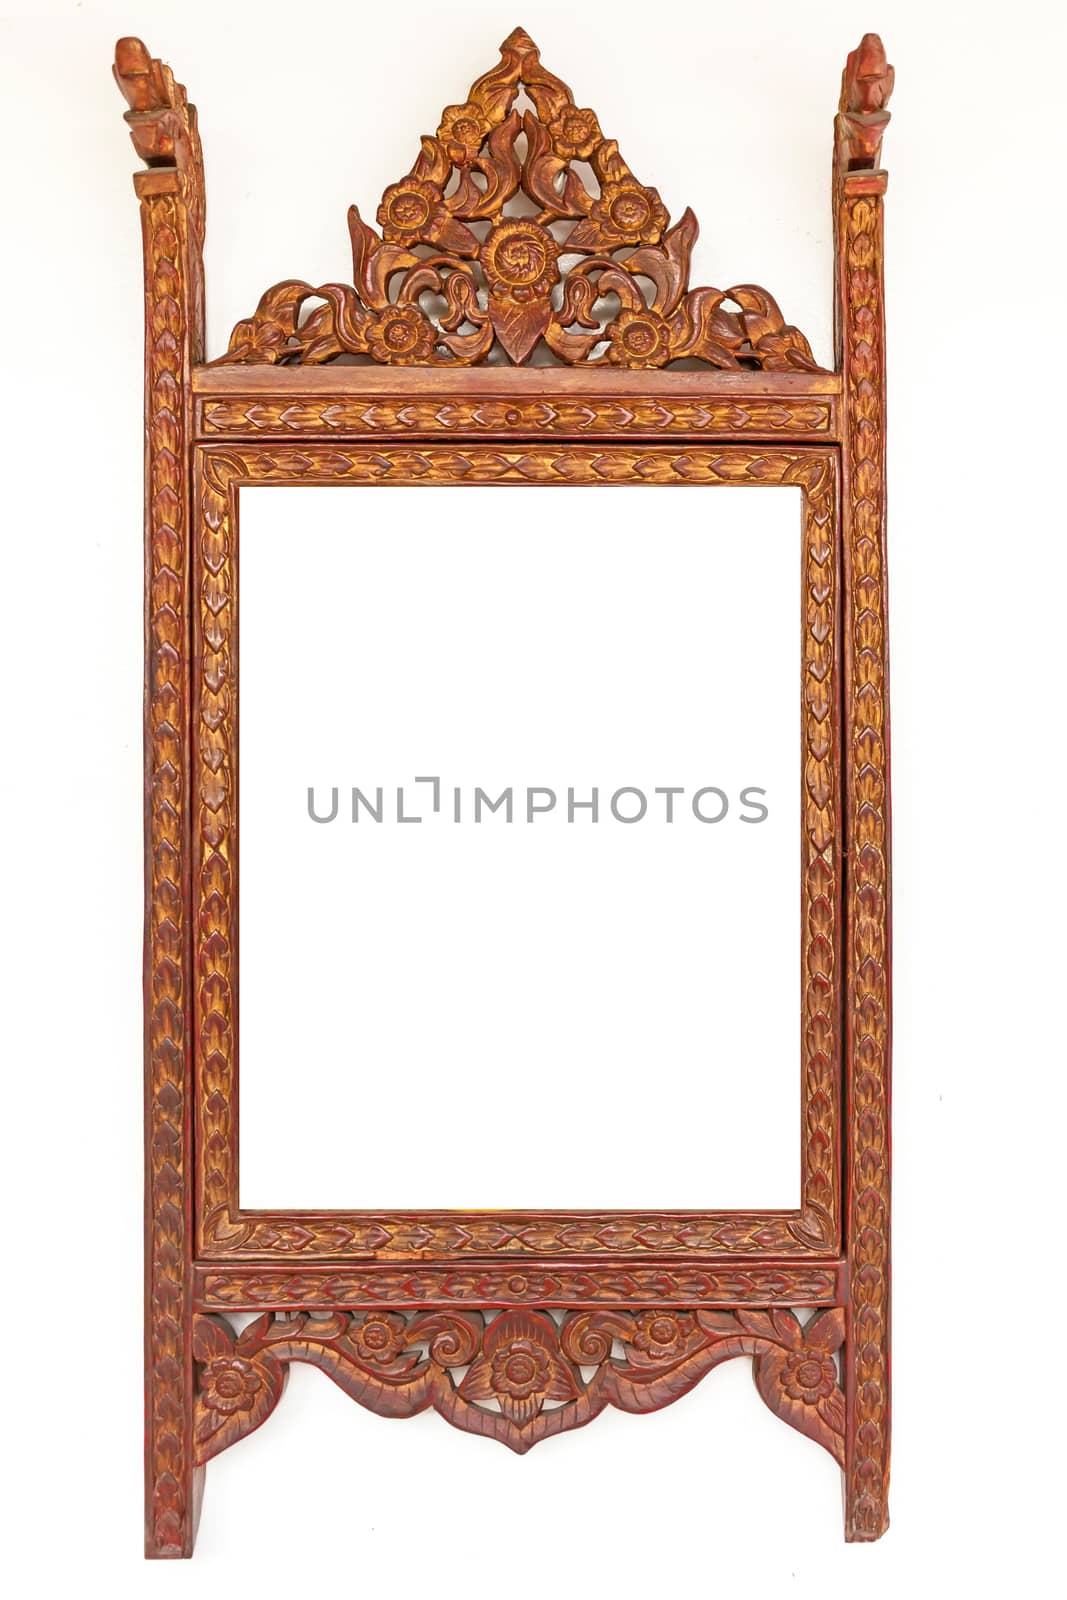 craft wood thai culture frame isolated on white .